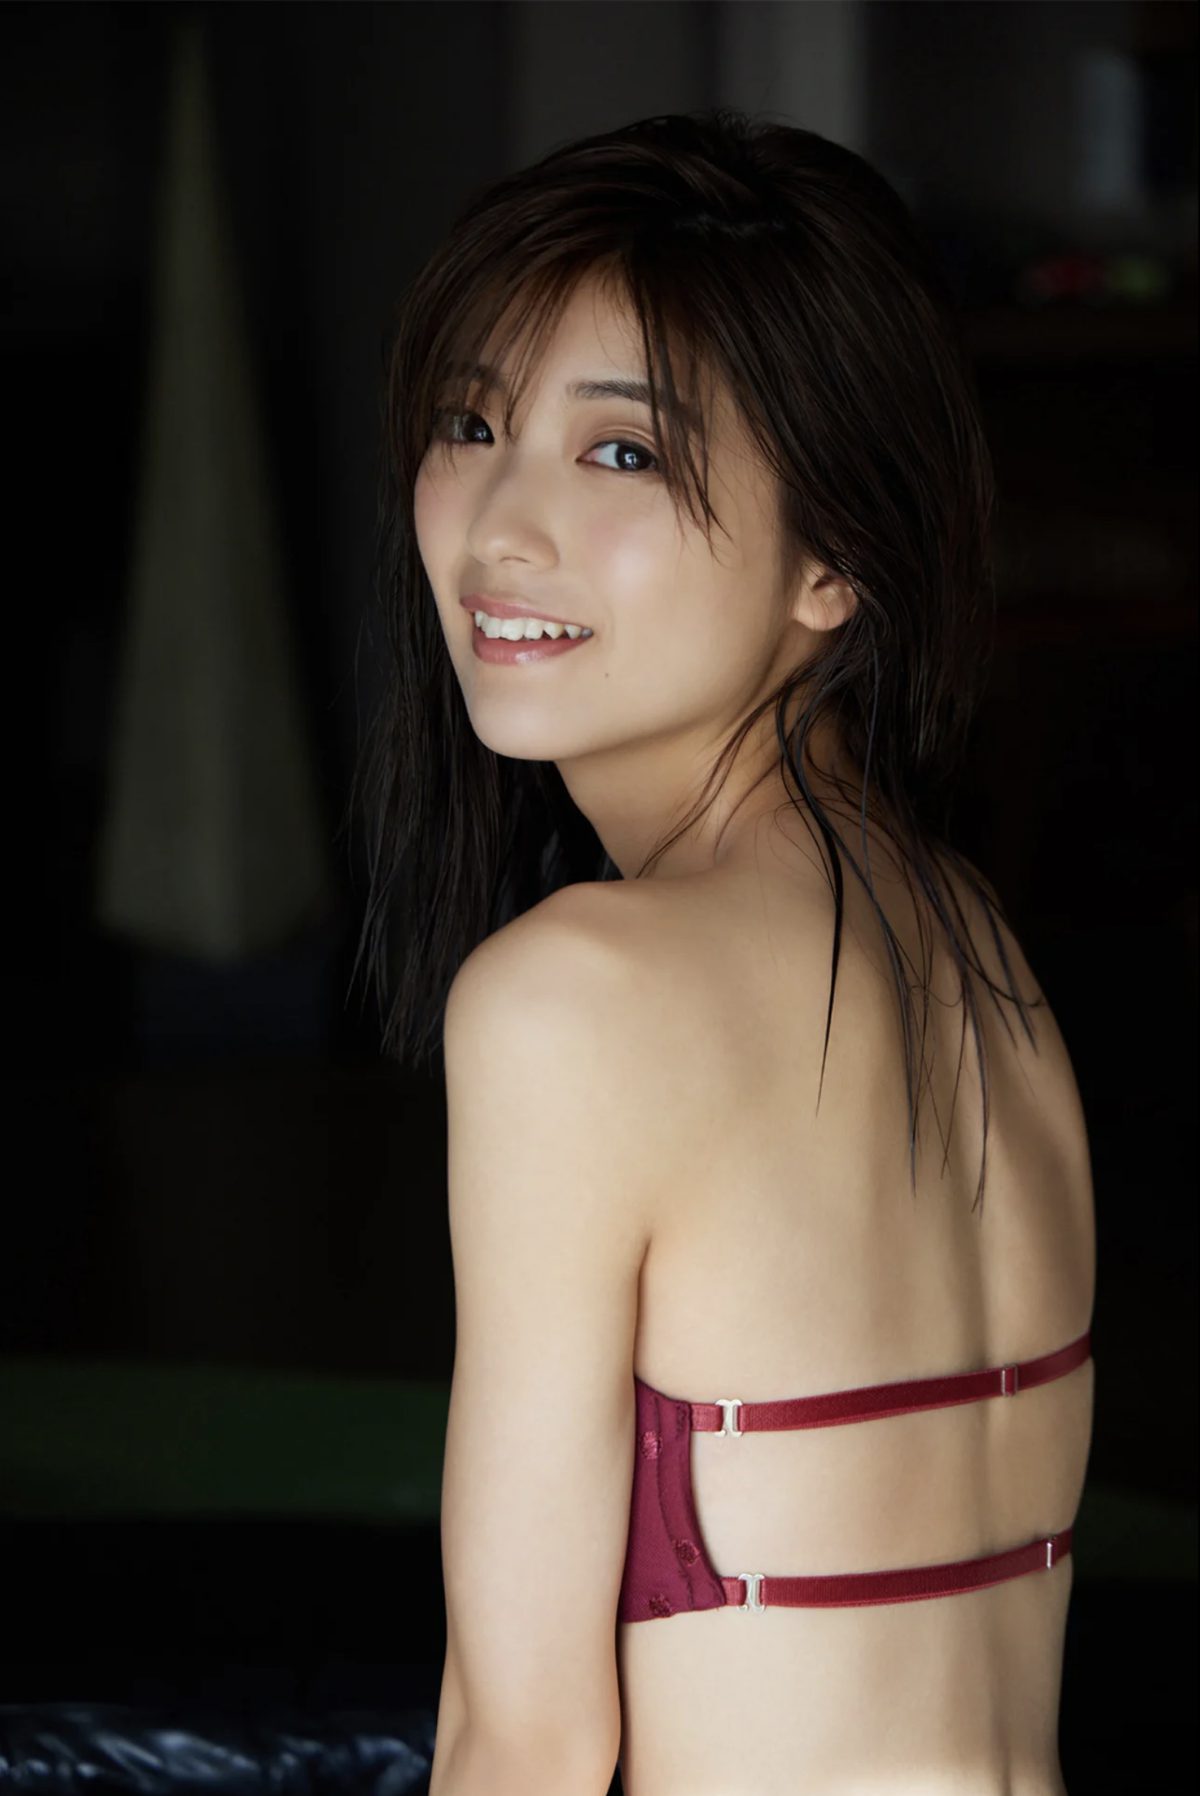 FRIDAY Digital Photobook 2021 03 10 Mio Kudo 工藤美桜 Adult SEXY that fascinates for the first time はじめて魅せる大人ＳＥＸＹ 083 8779846415.jpg